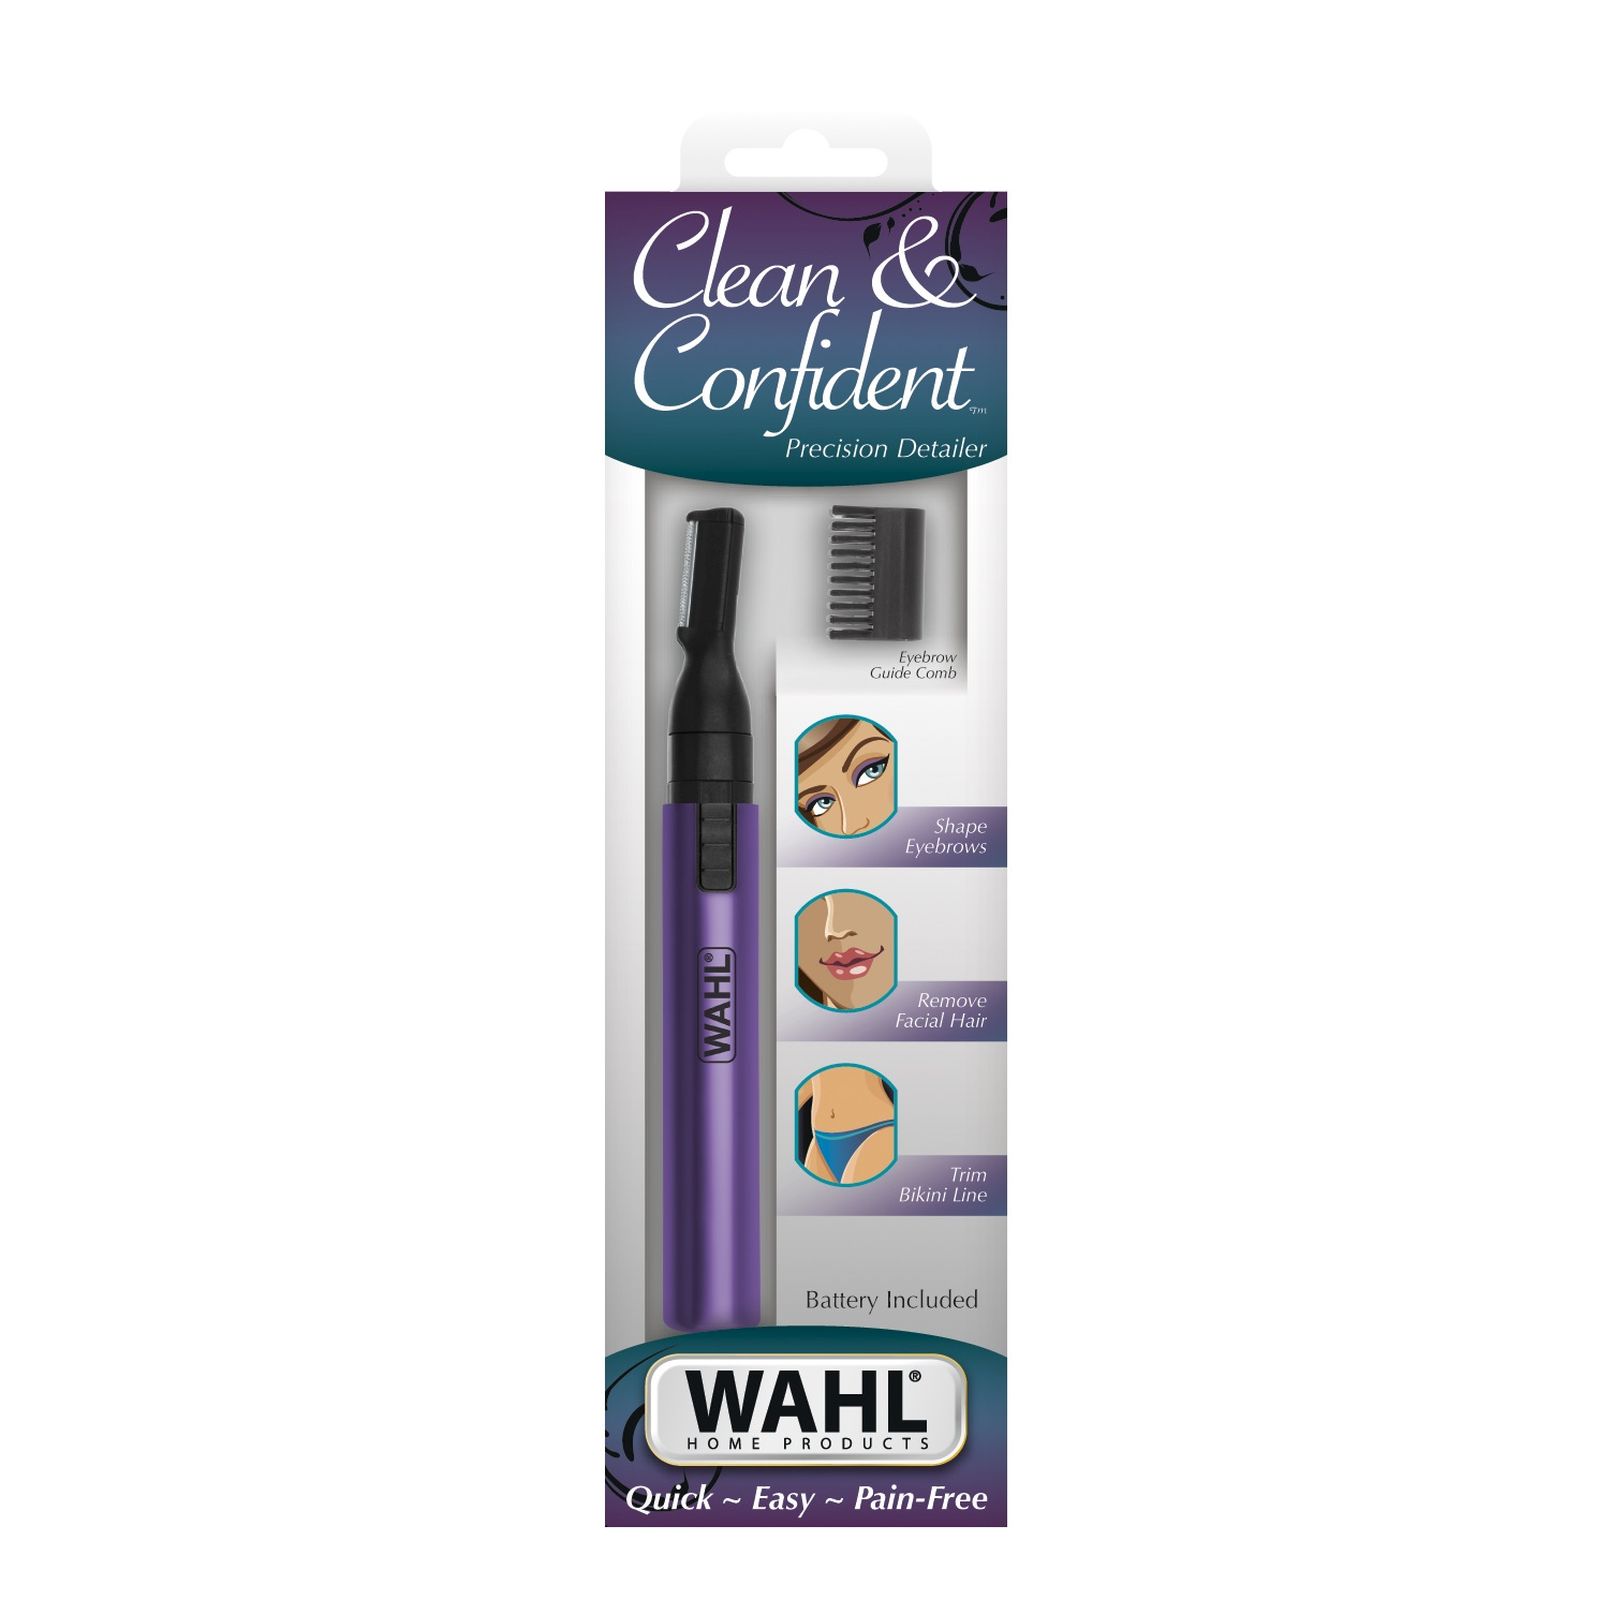 wahl clean and confident precision detailer